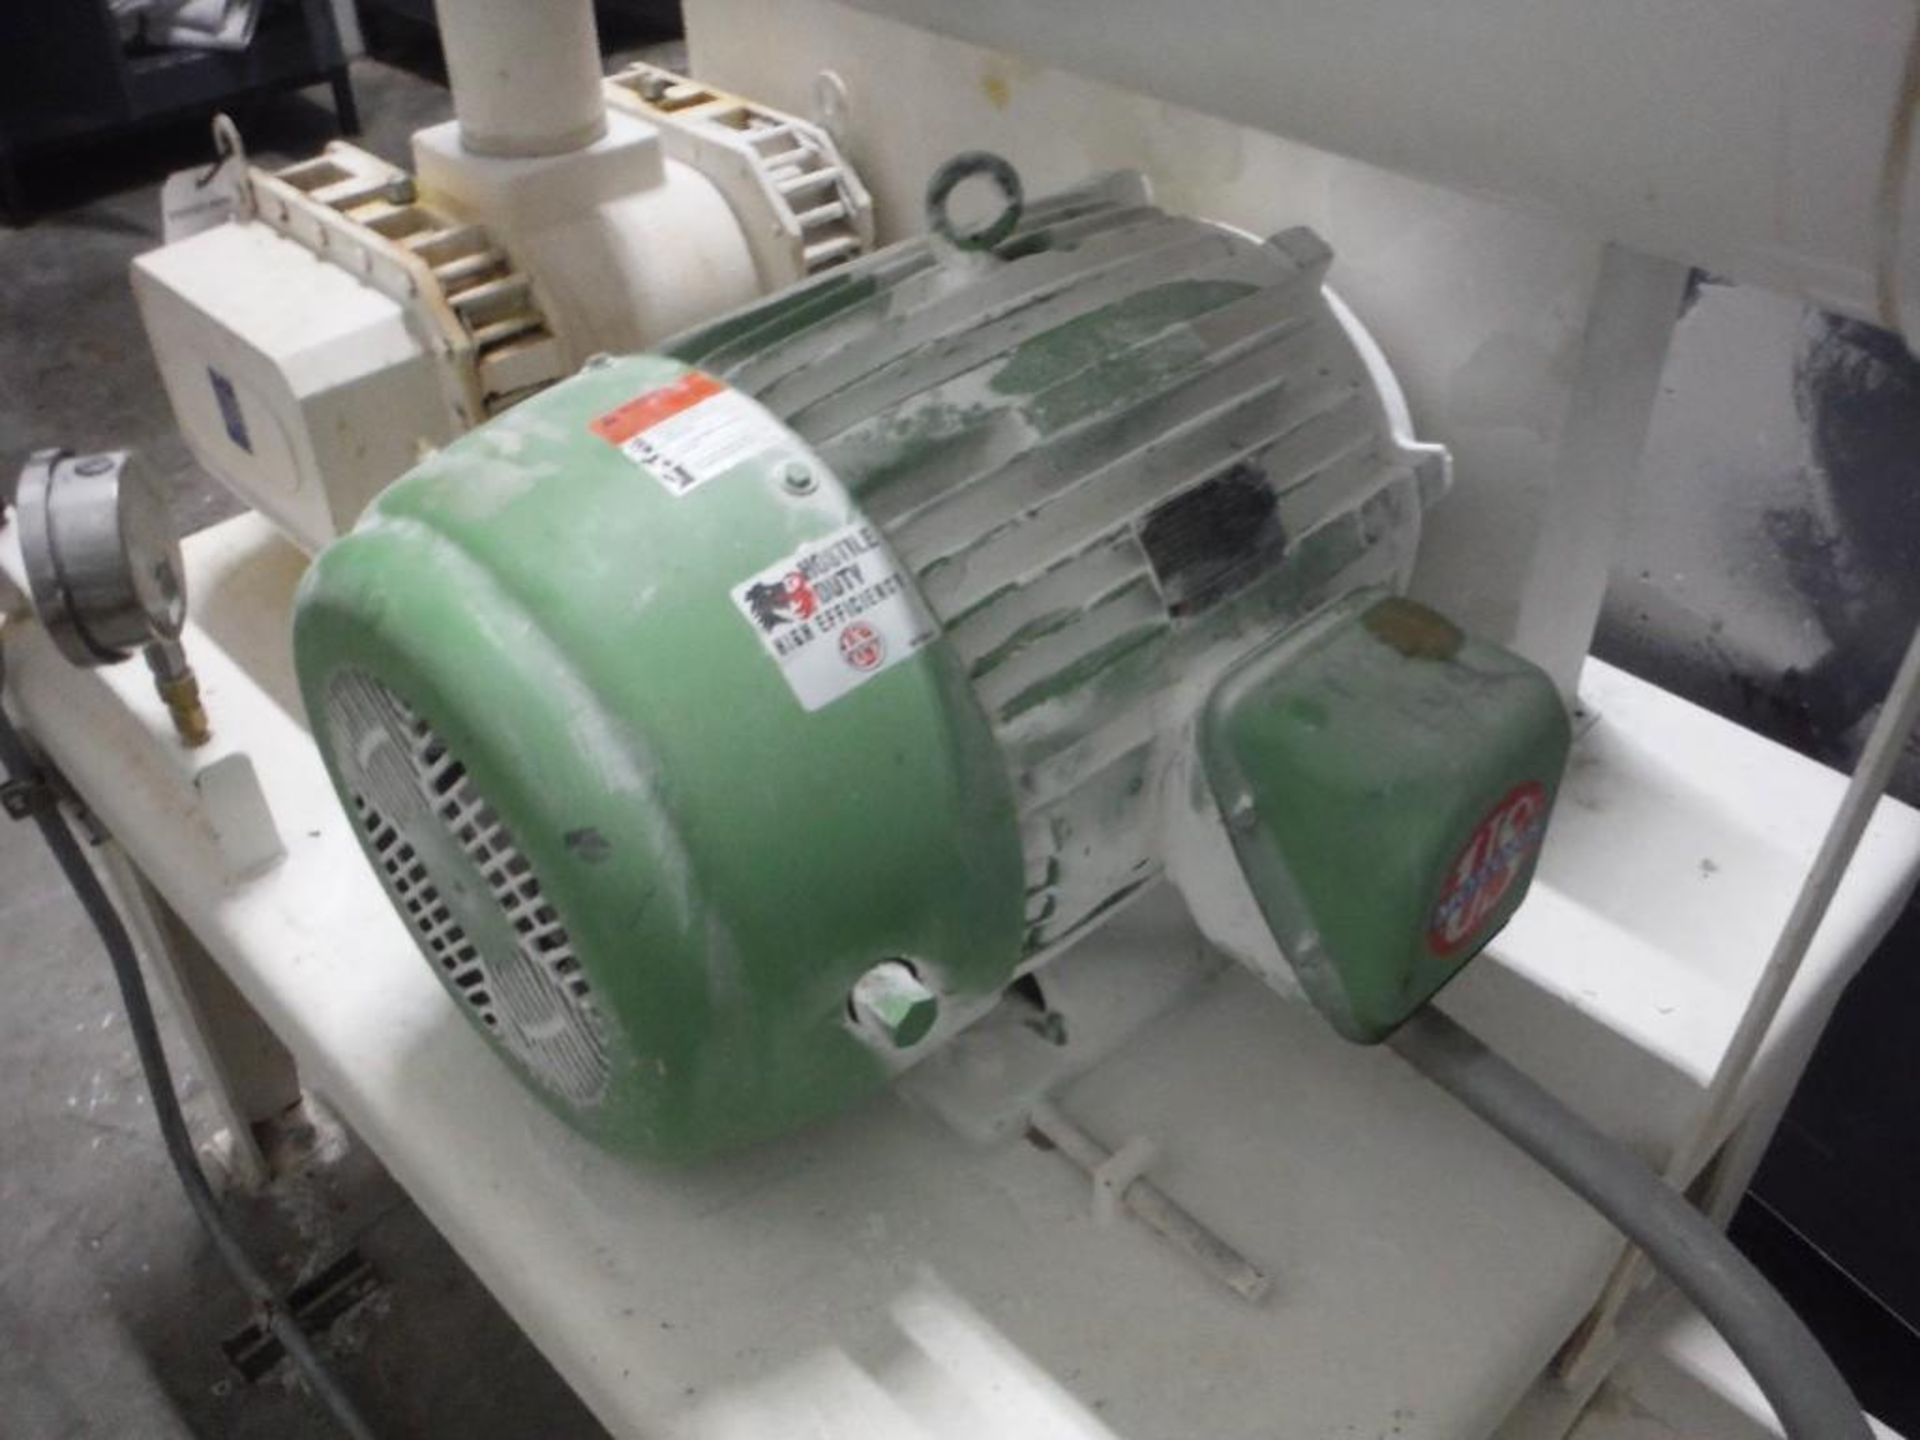 Shick rotary lobe blower, Model 93 F 47359, 50 hp - Rigging Fee: $300 - Image 5 of 7